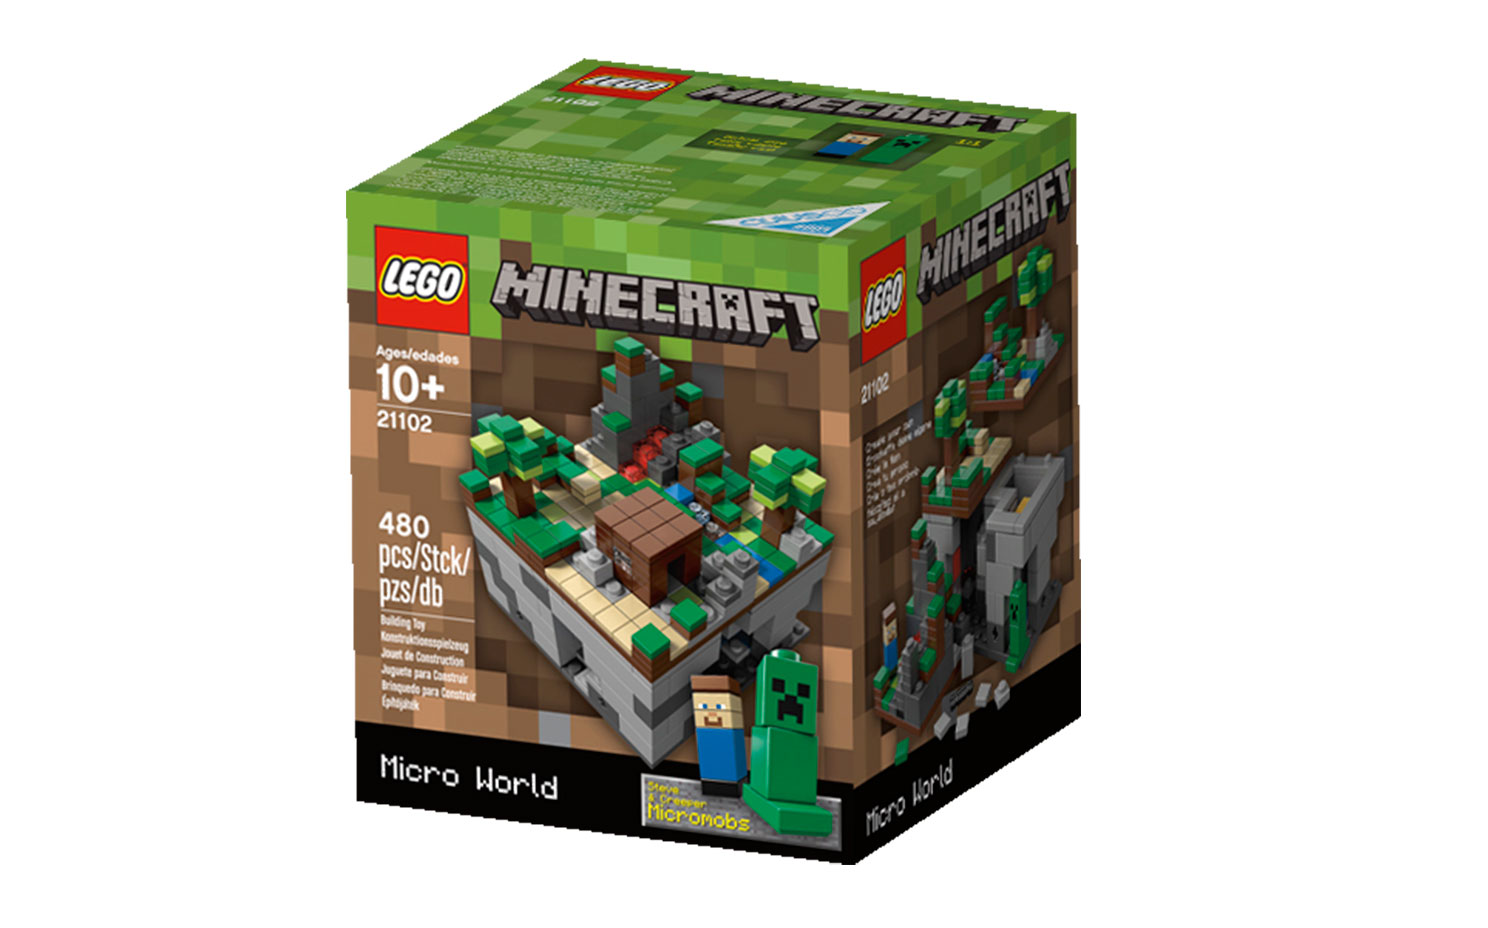 Micro The Forest 21102 - LEGO® Minecraft™ Sets - LEGO.com kids